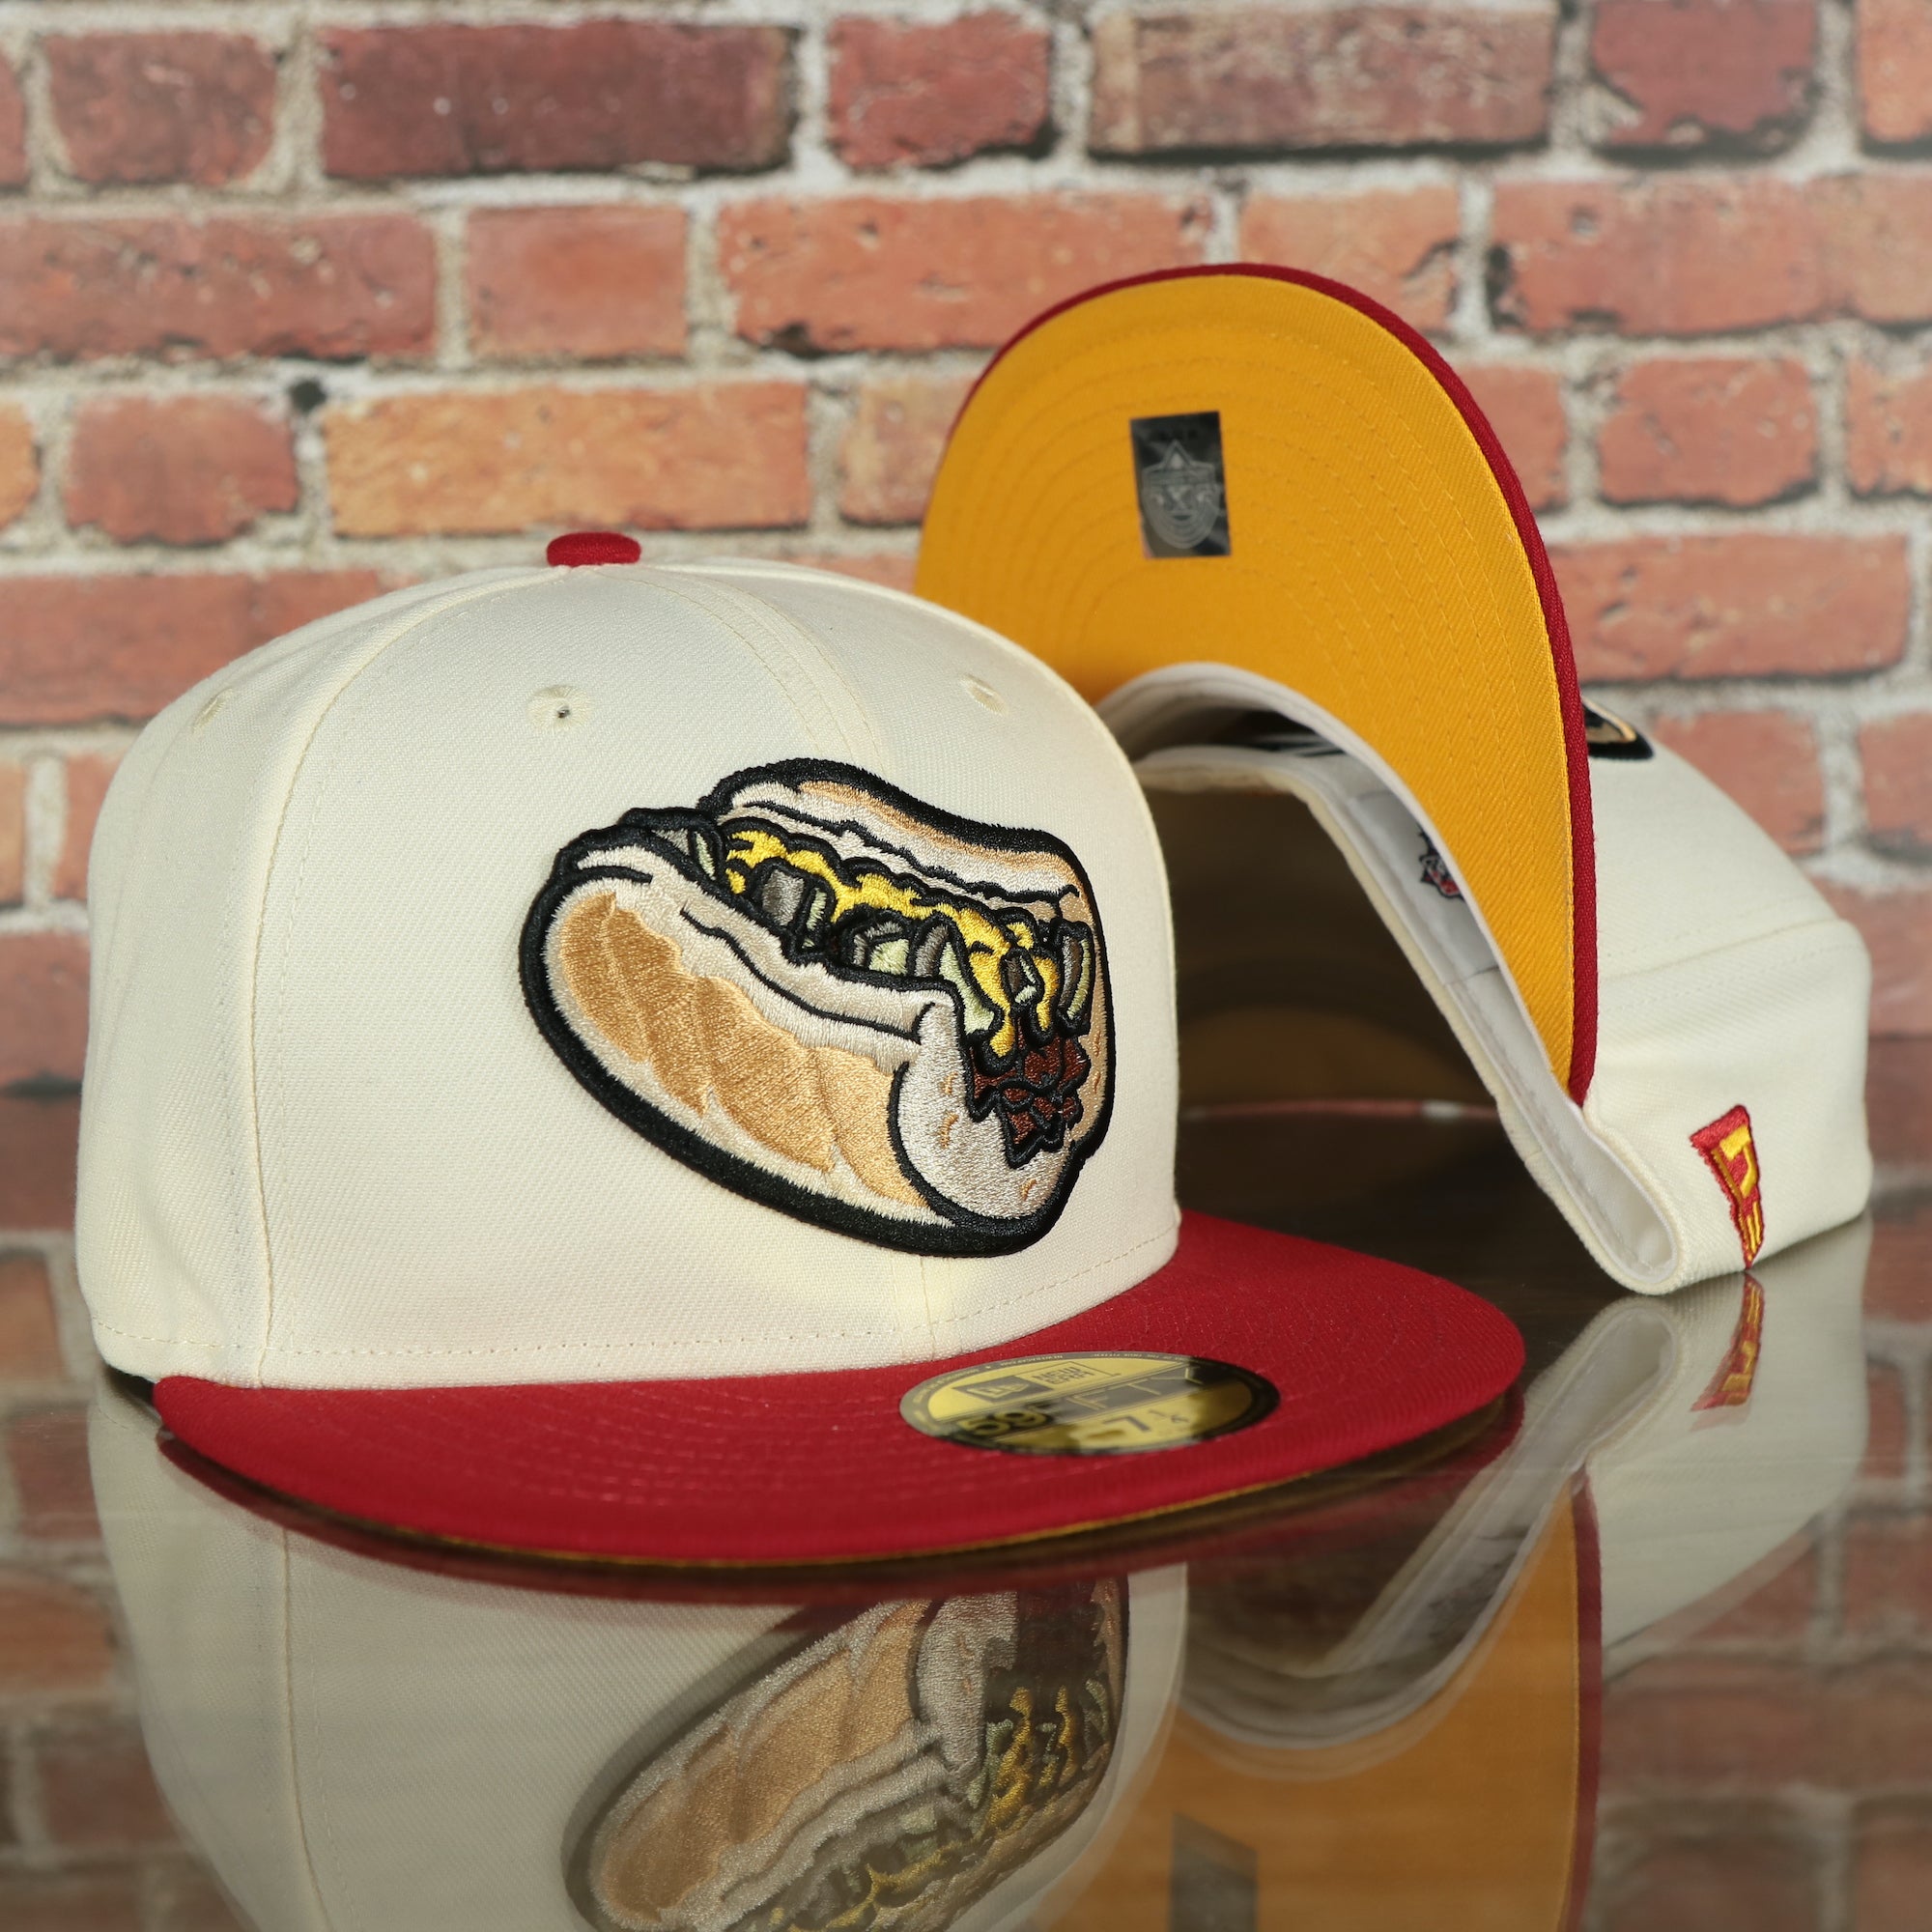 Lehigh Valley Iron Pigs Croquis 59Fifty Side Patch Fitted